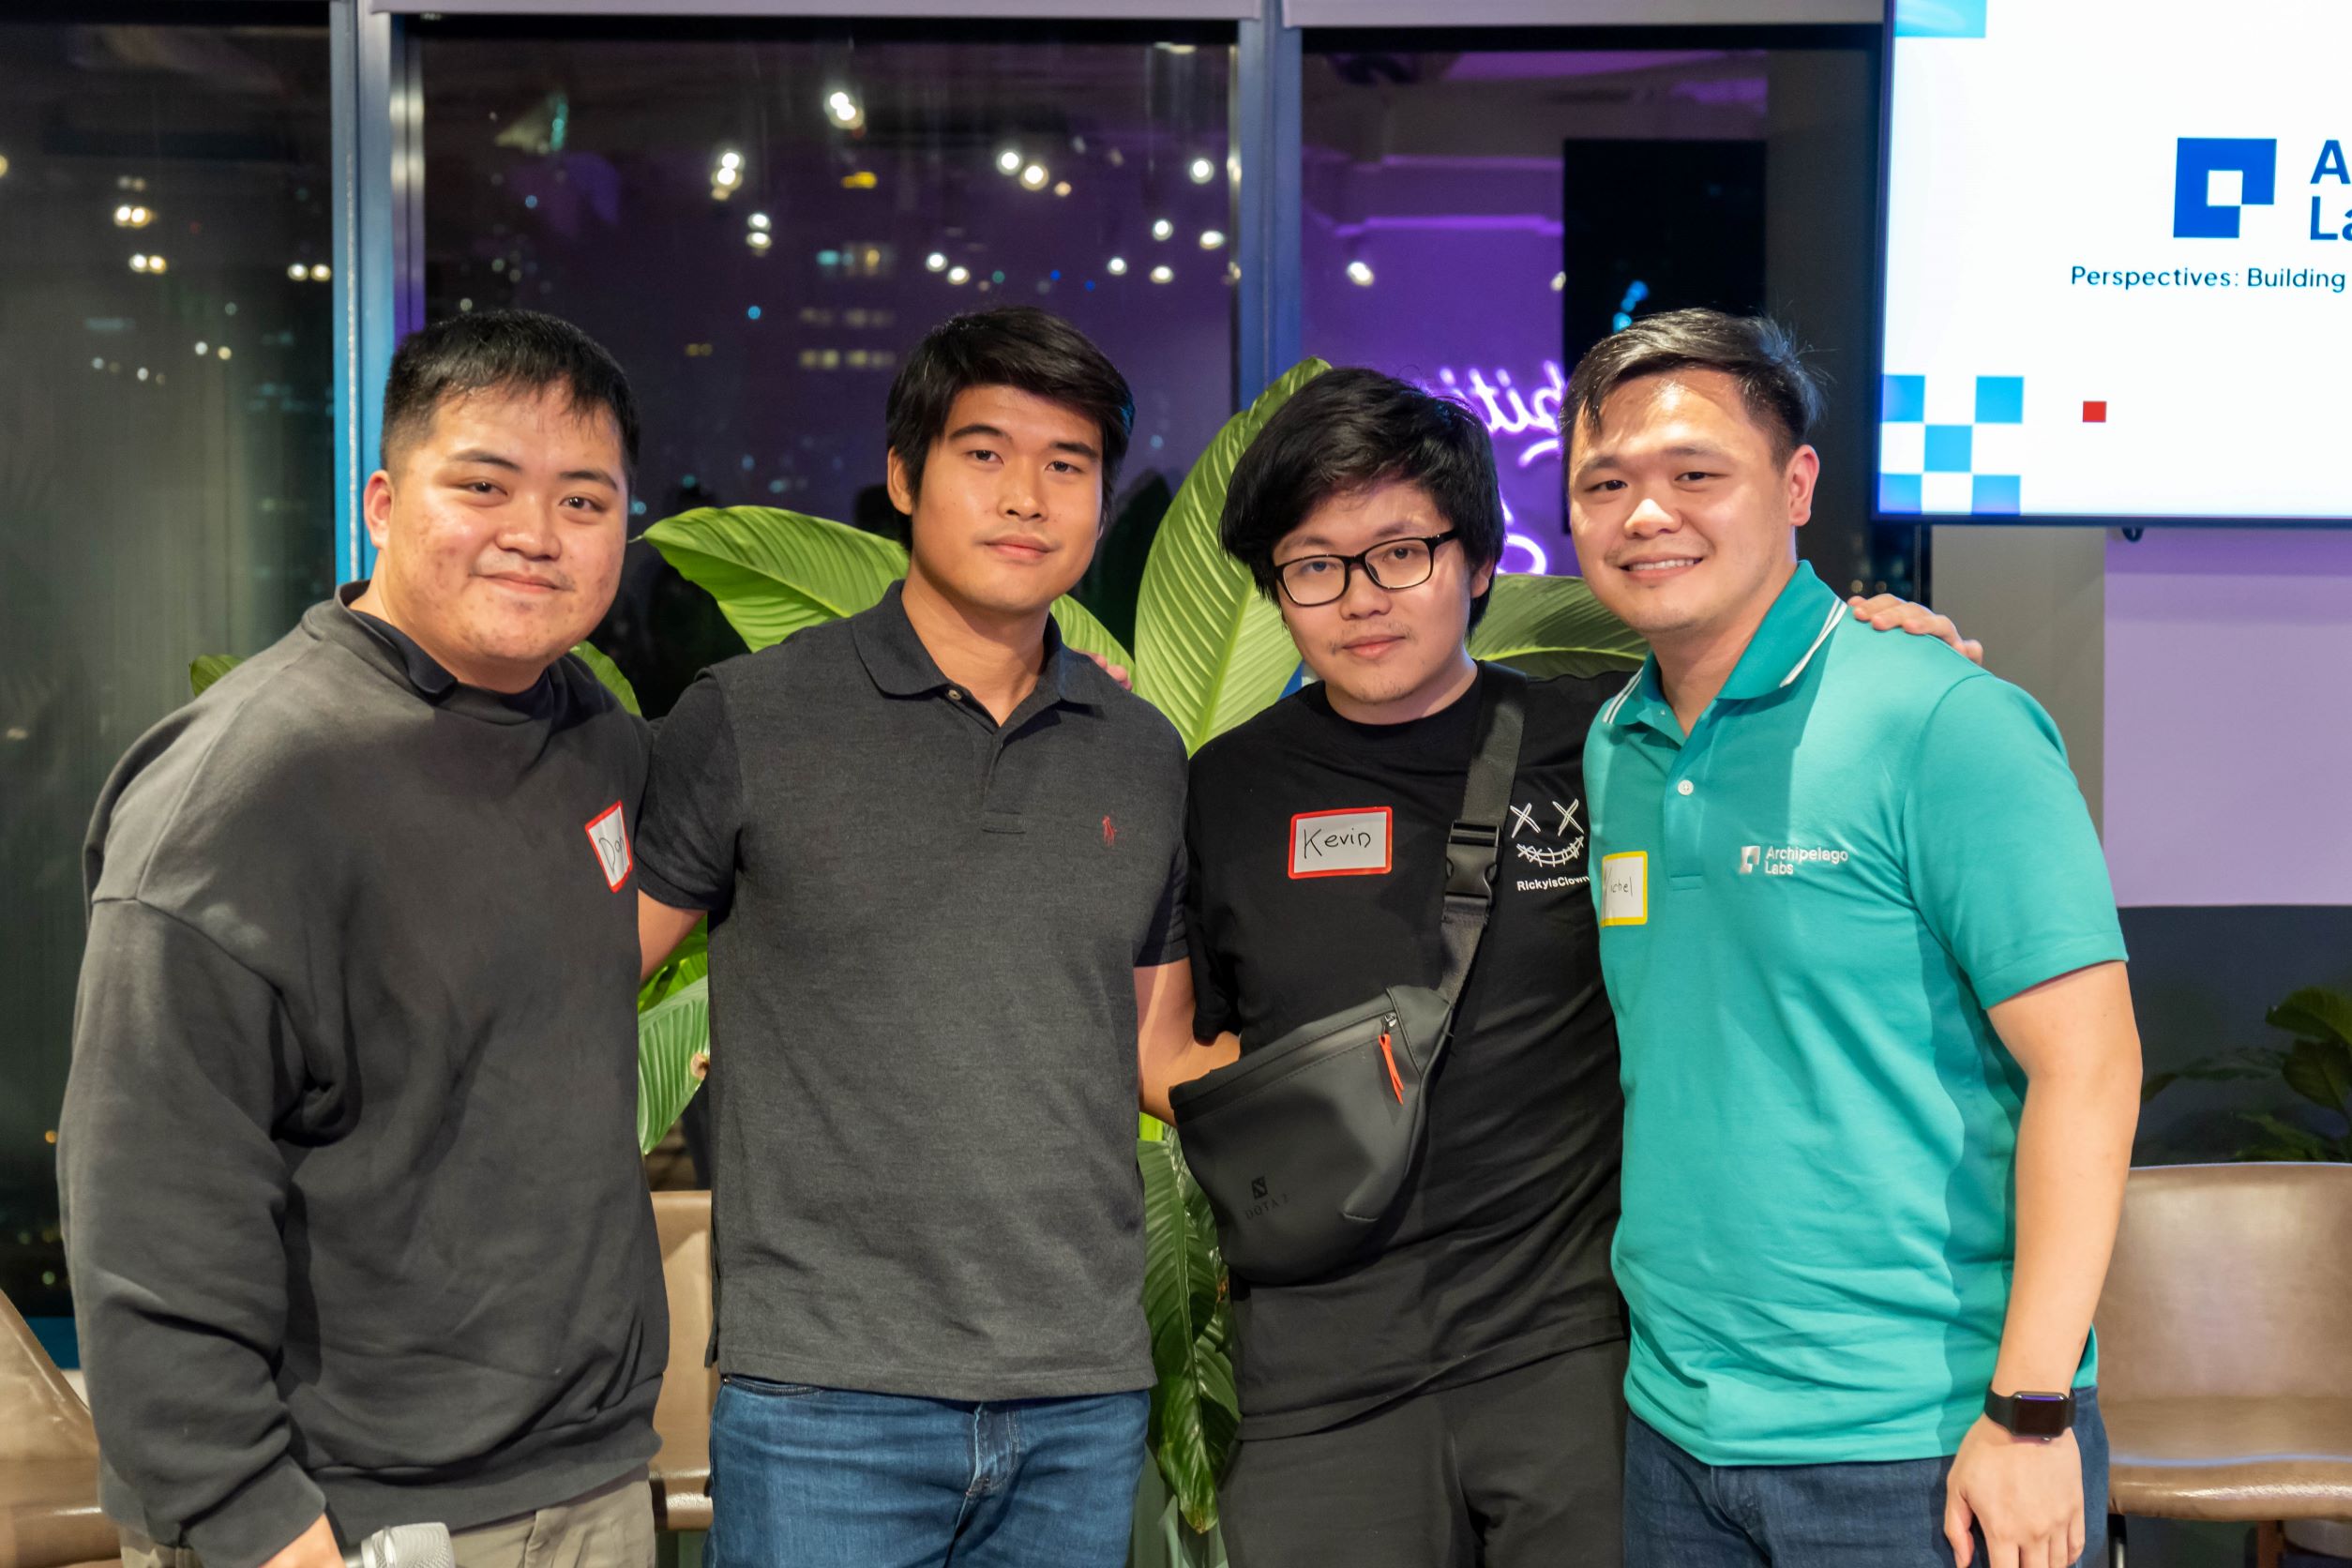 Speakers Left to Right: Dan Laborada (CEO of PlayDex), Chris Verceles (CEO of Xave Finance), Kevin Hoang (CEO of AcadArena), Nichel Gaba (CEO of PDAX, Principal at Archipelago Labs)